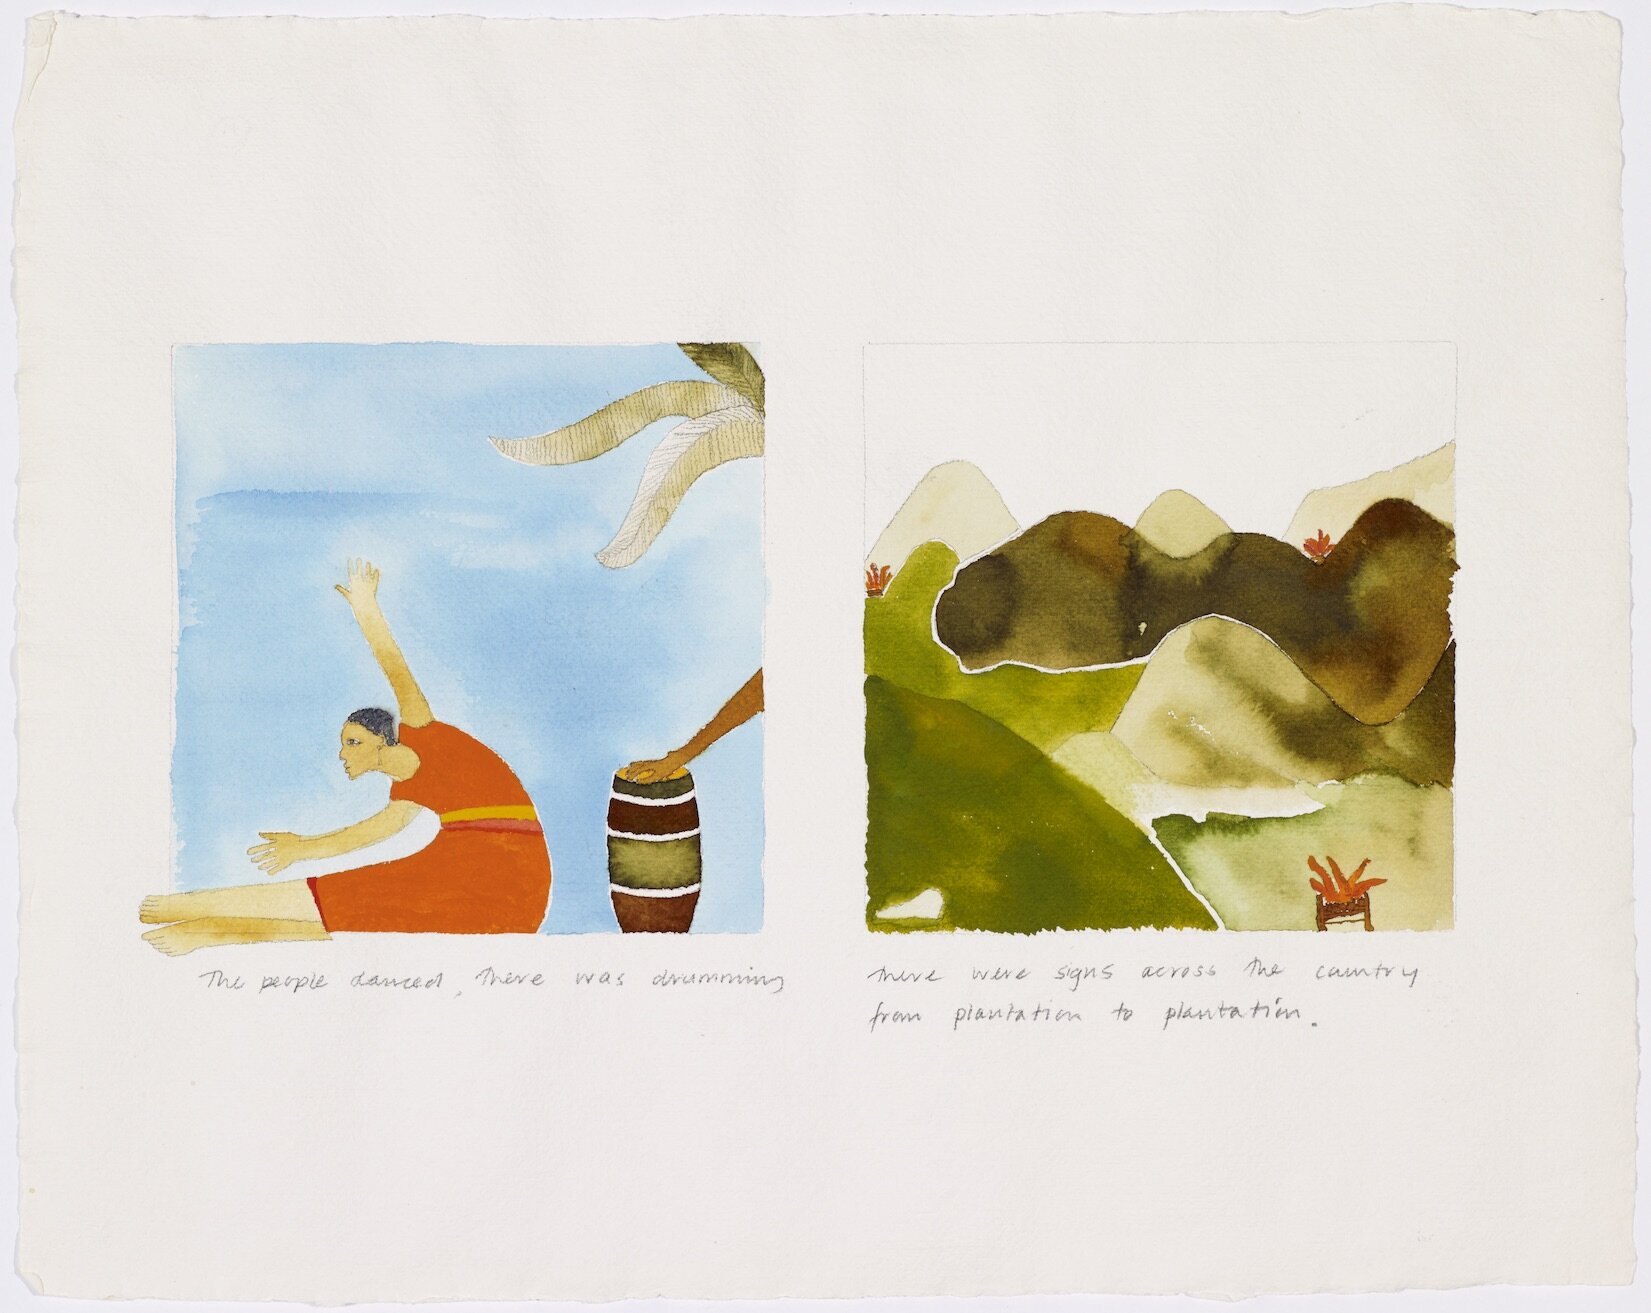 Lubaina Himid, Scenes from the Life of Toussaint L'Ouverture: 4 (1987), watercolour and pencil on paper, 39.5 x 50 cm. Arts Council Collection, Southbank Centre, London © Lubaina Himid.